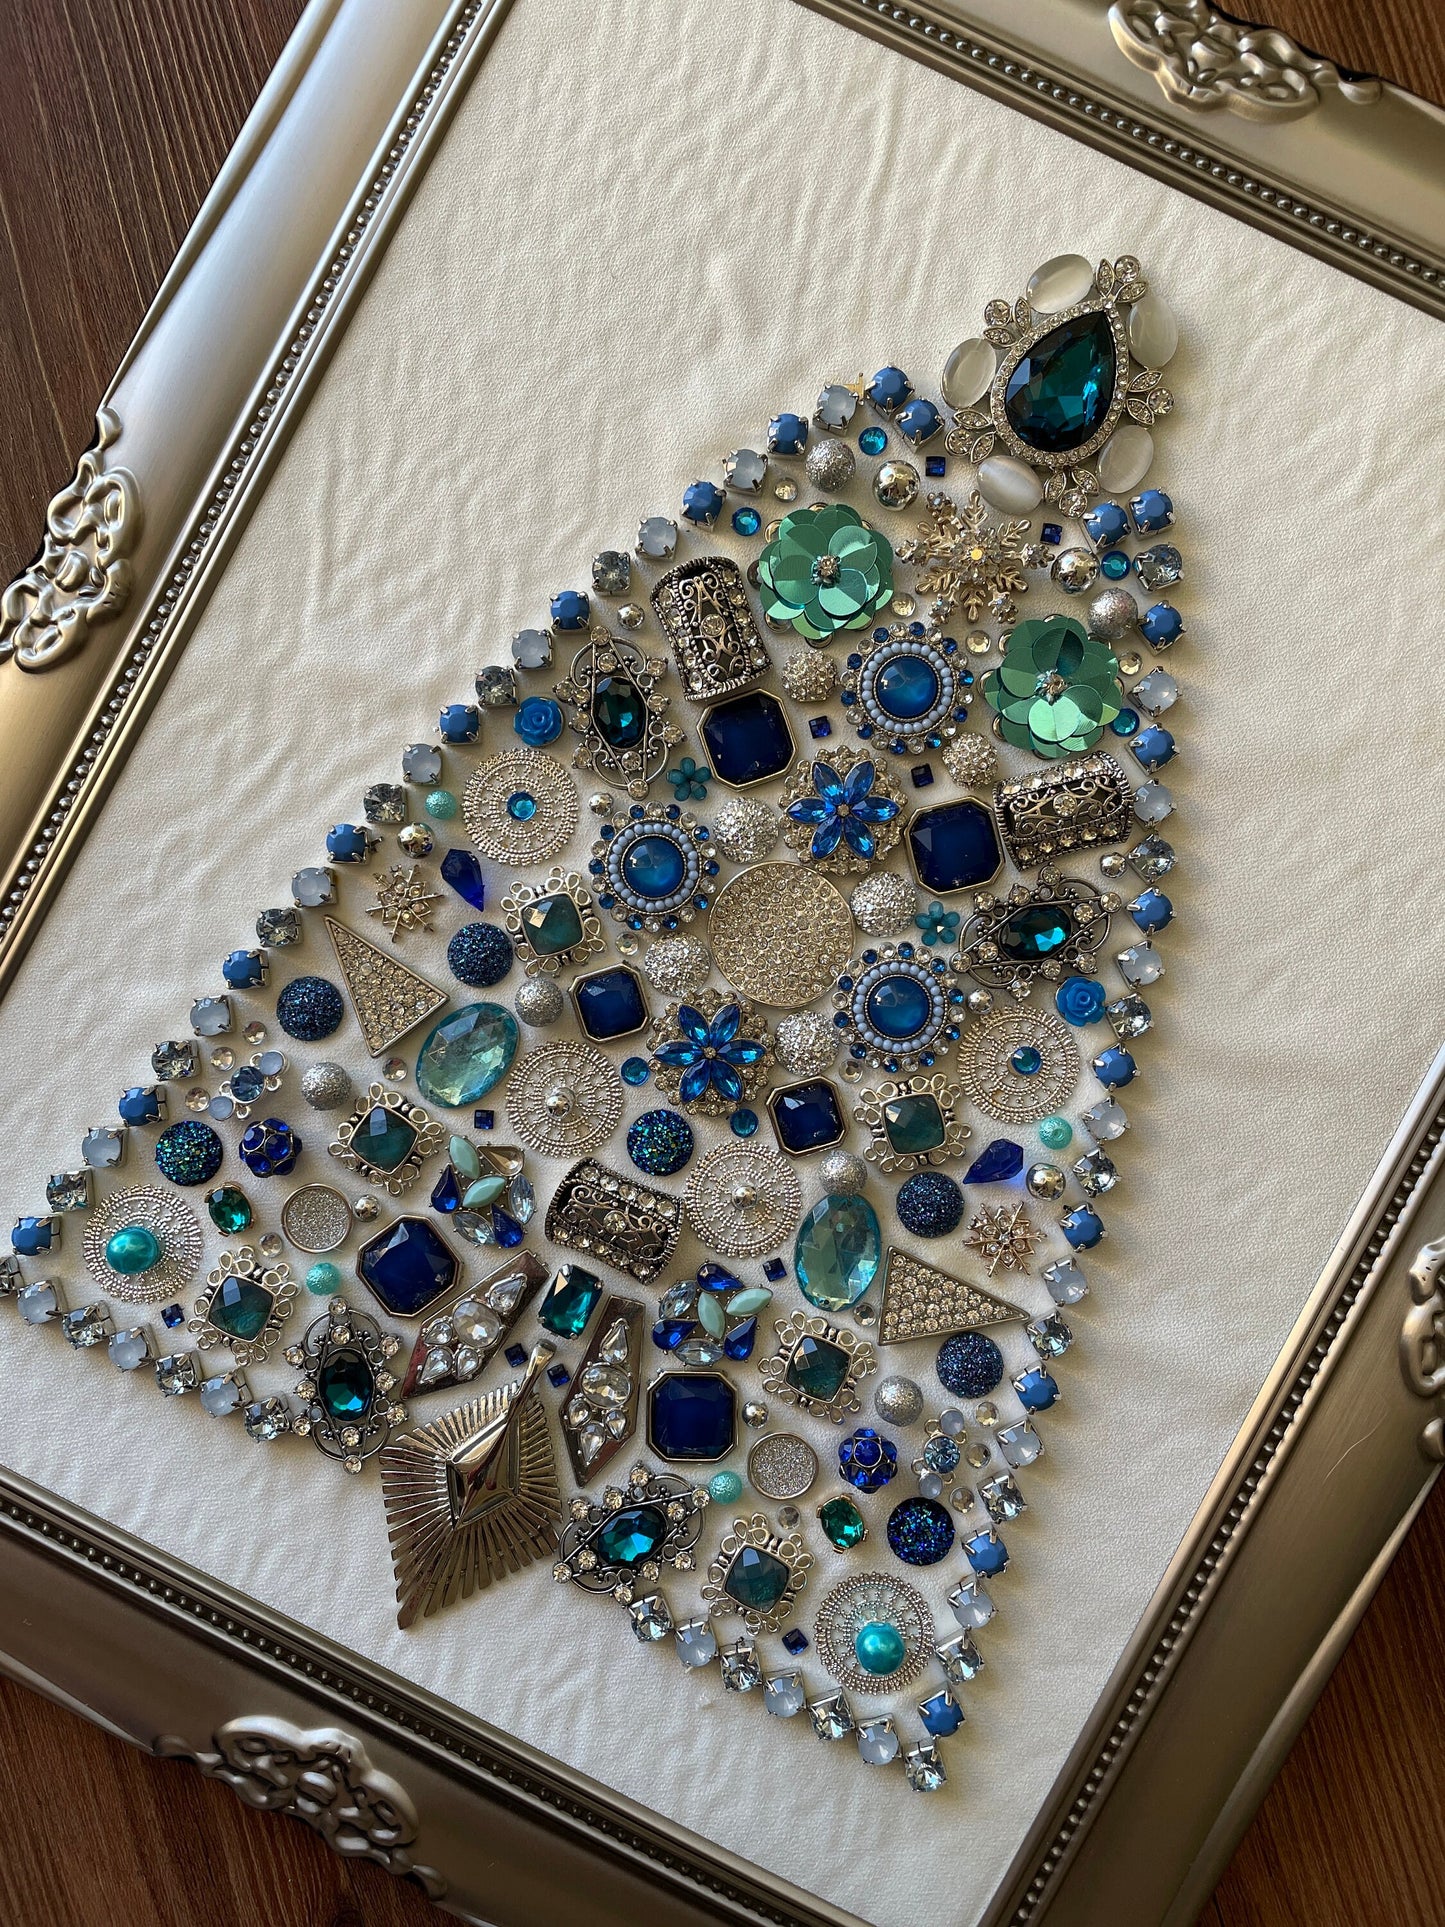 Blue and Silver Framed Jewelry Christmas Tree Handmade with Over 60 Pieces of Vintage & Upcycled Jewelry